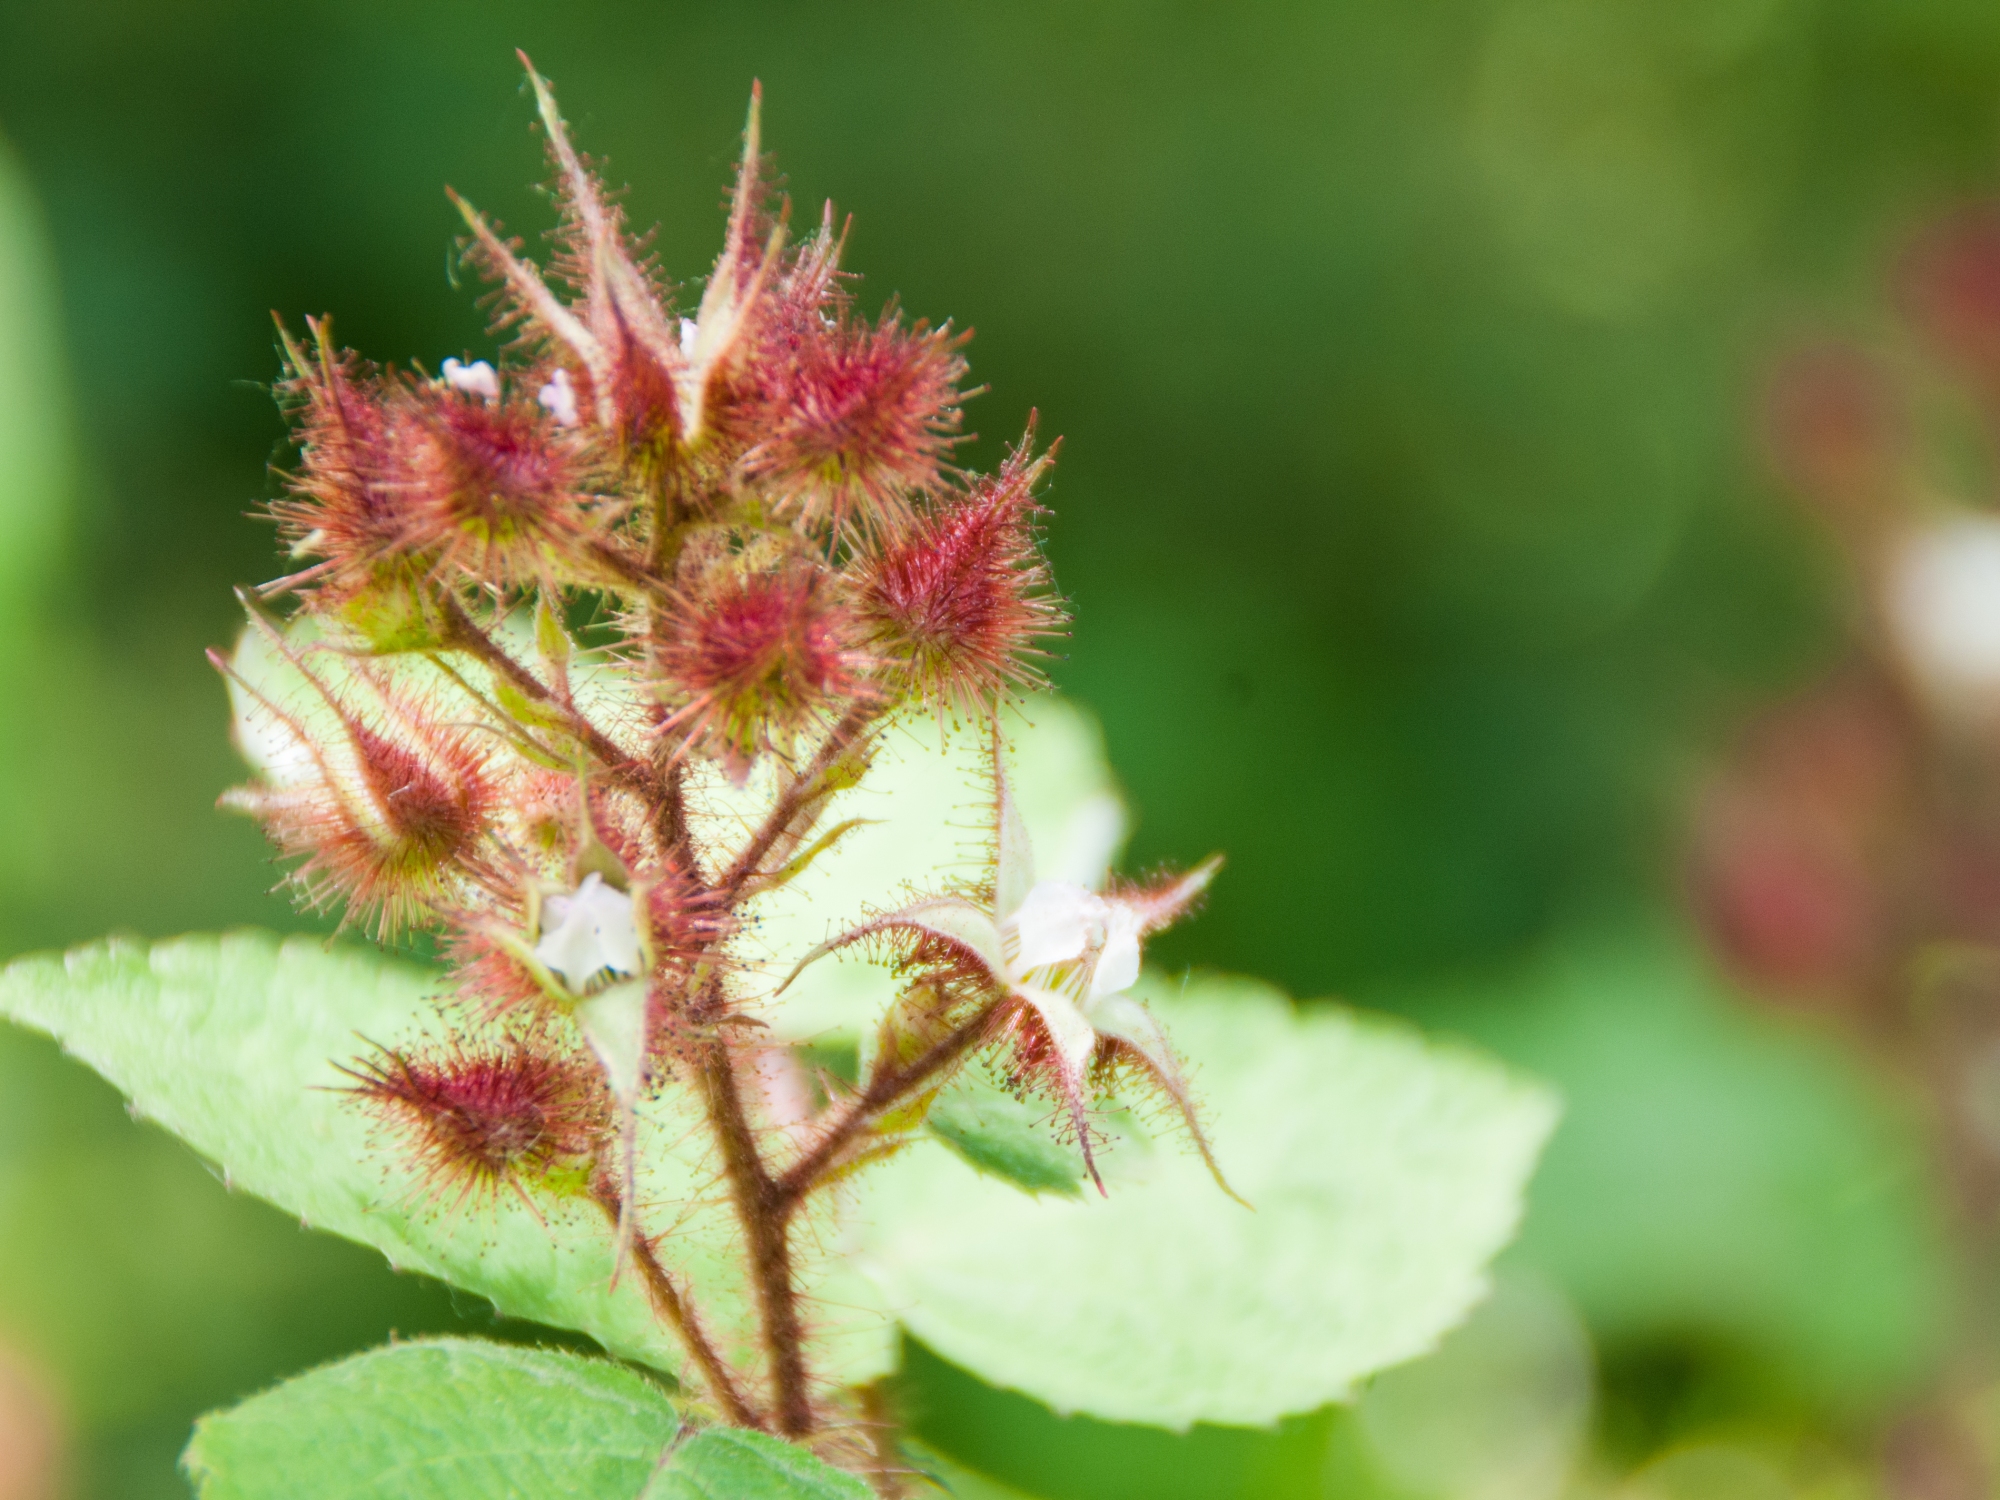 Wineberry happens to be on the list on invasive species here in Bucks County! Why is this pretty plant so bad?